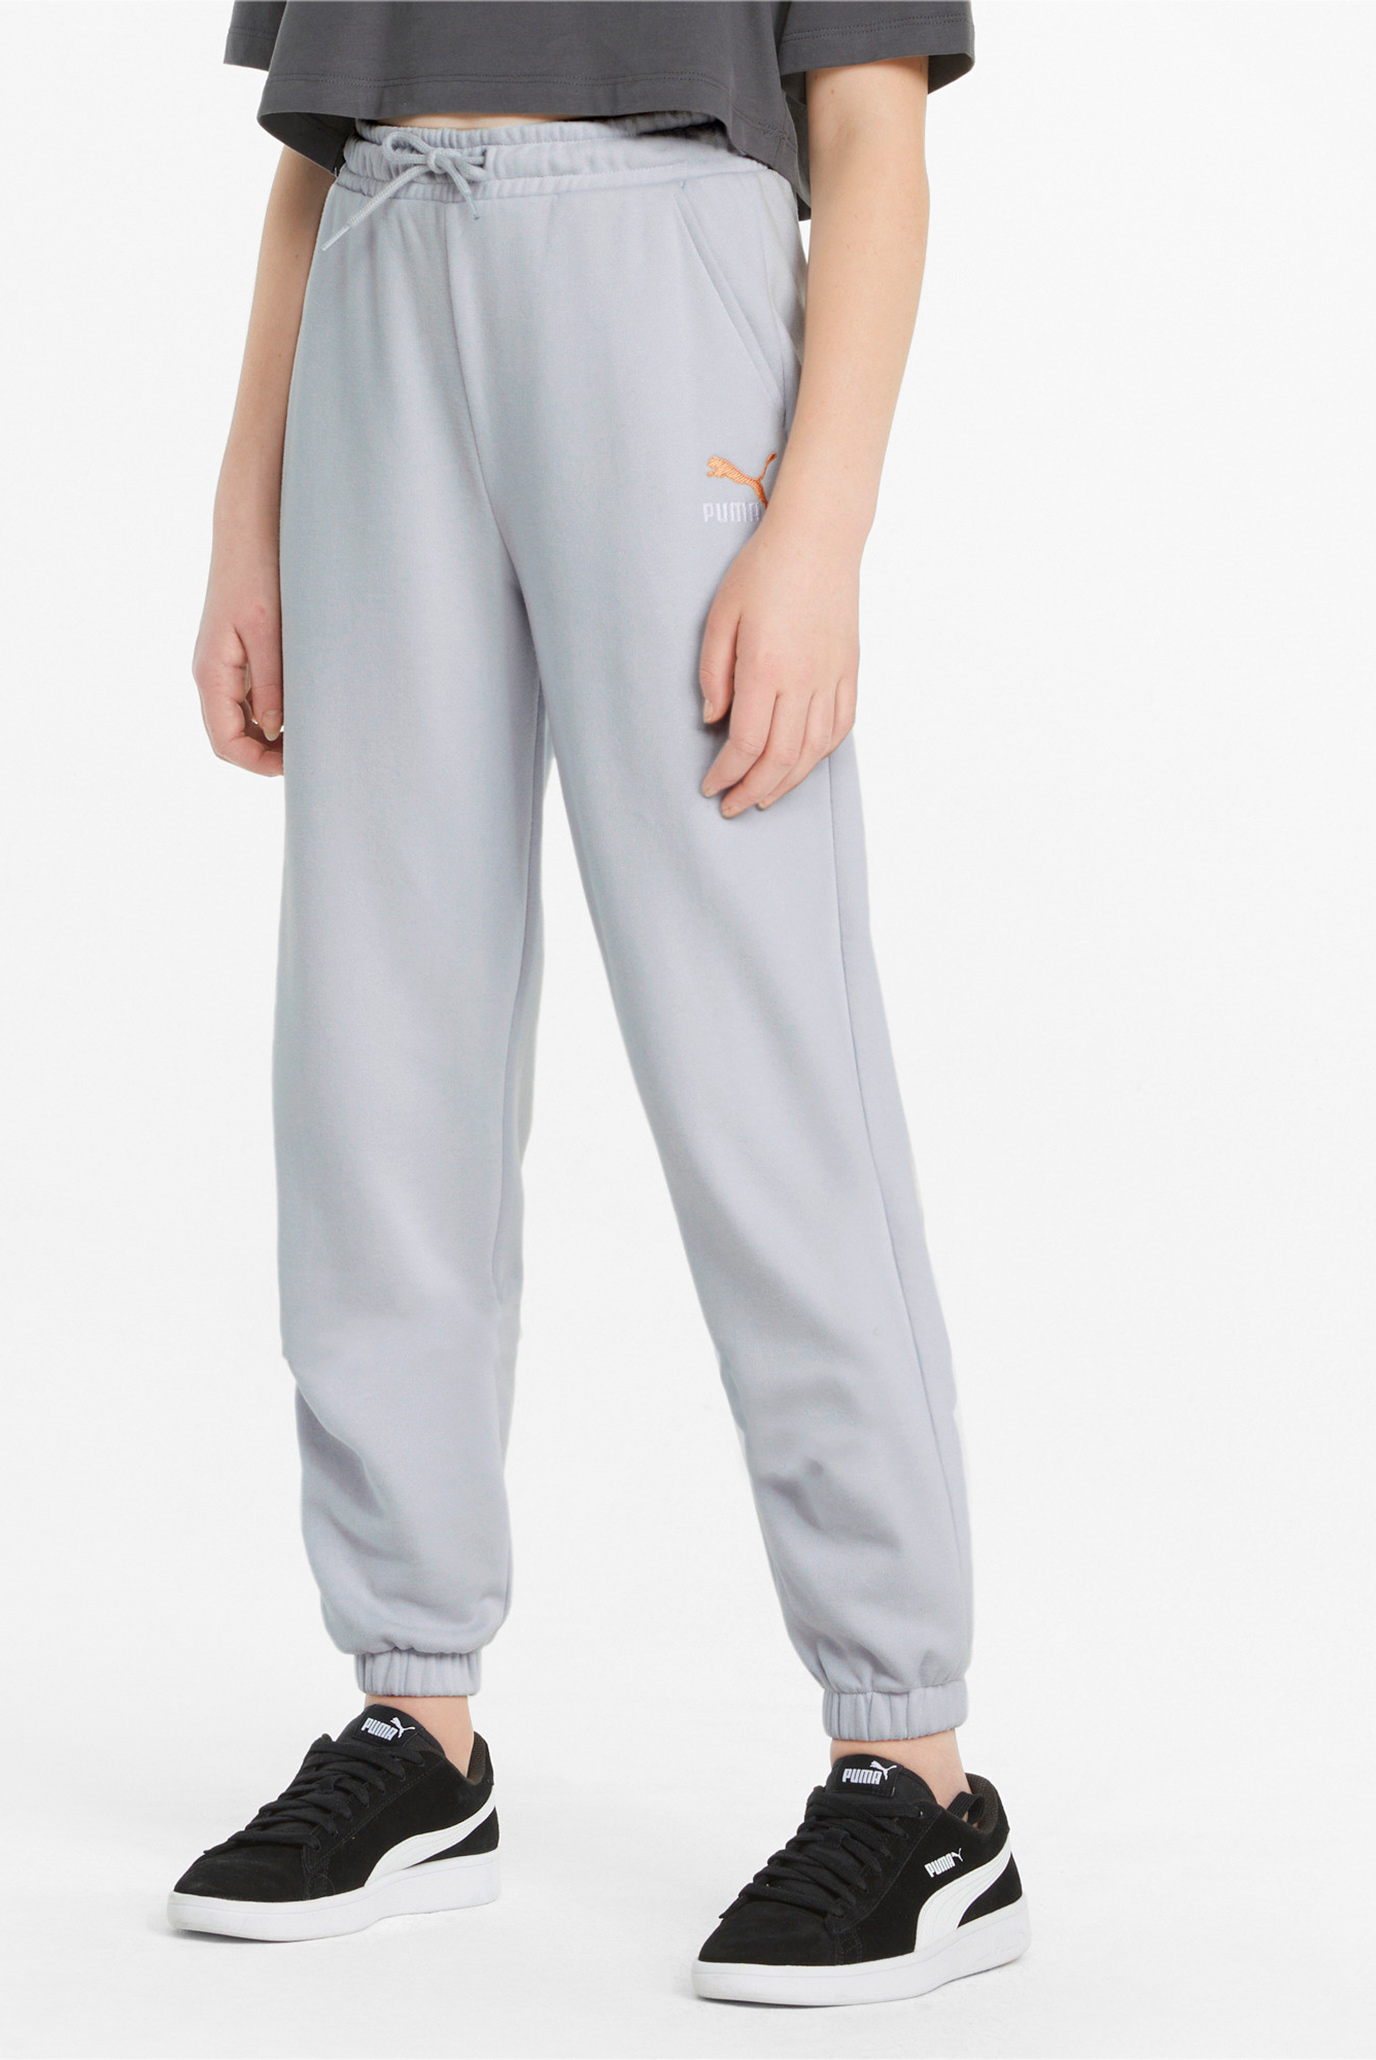 Дитячі штани GRL Relaxed Fit Youth Sweatpants 1